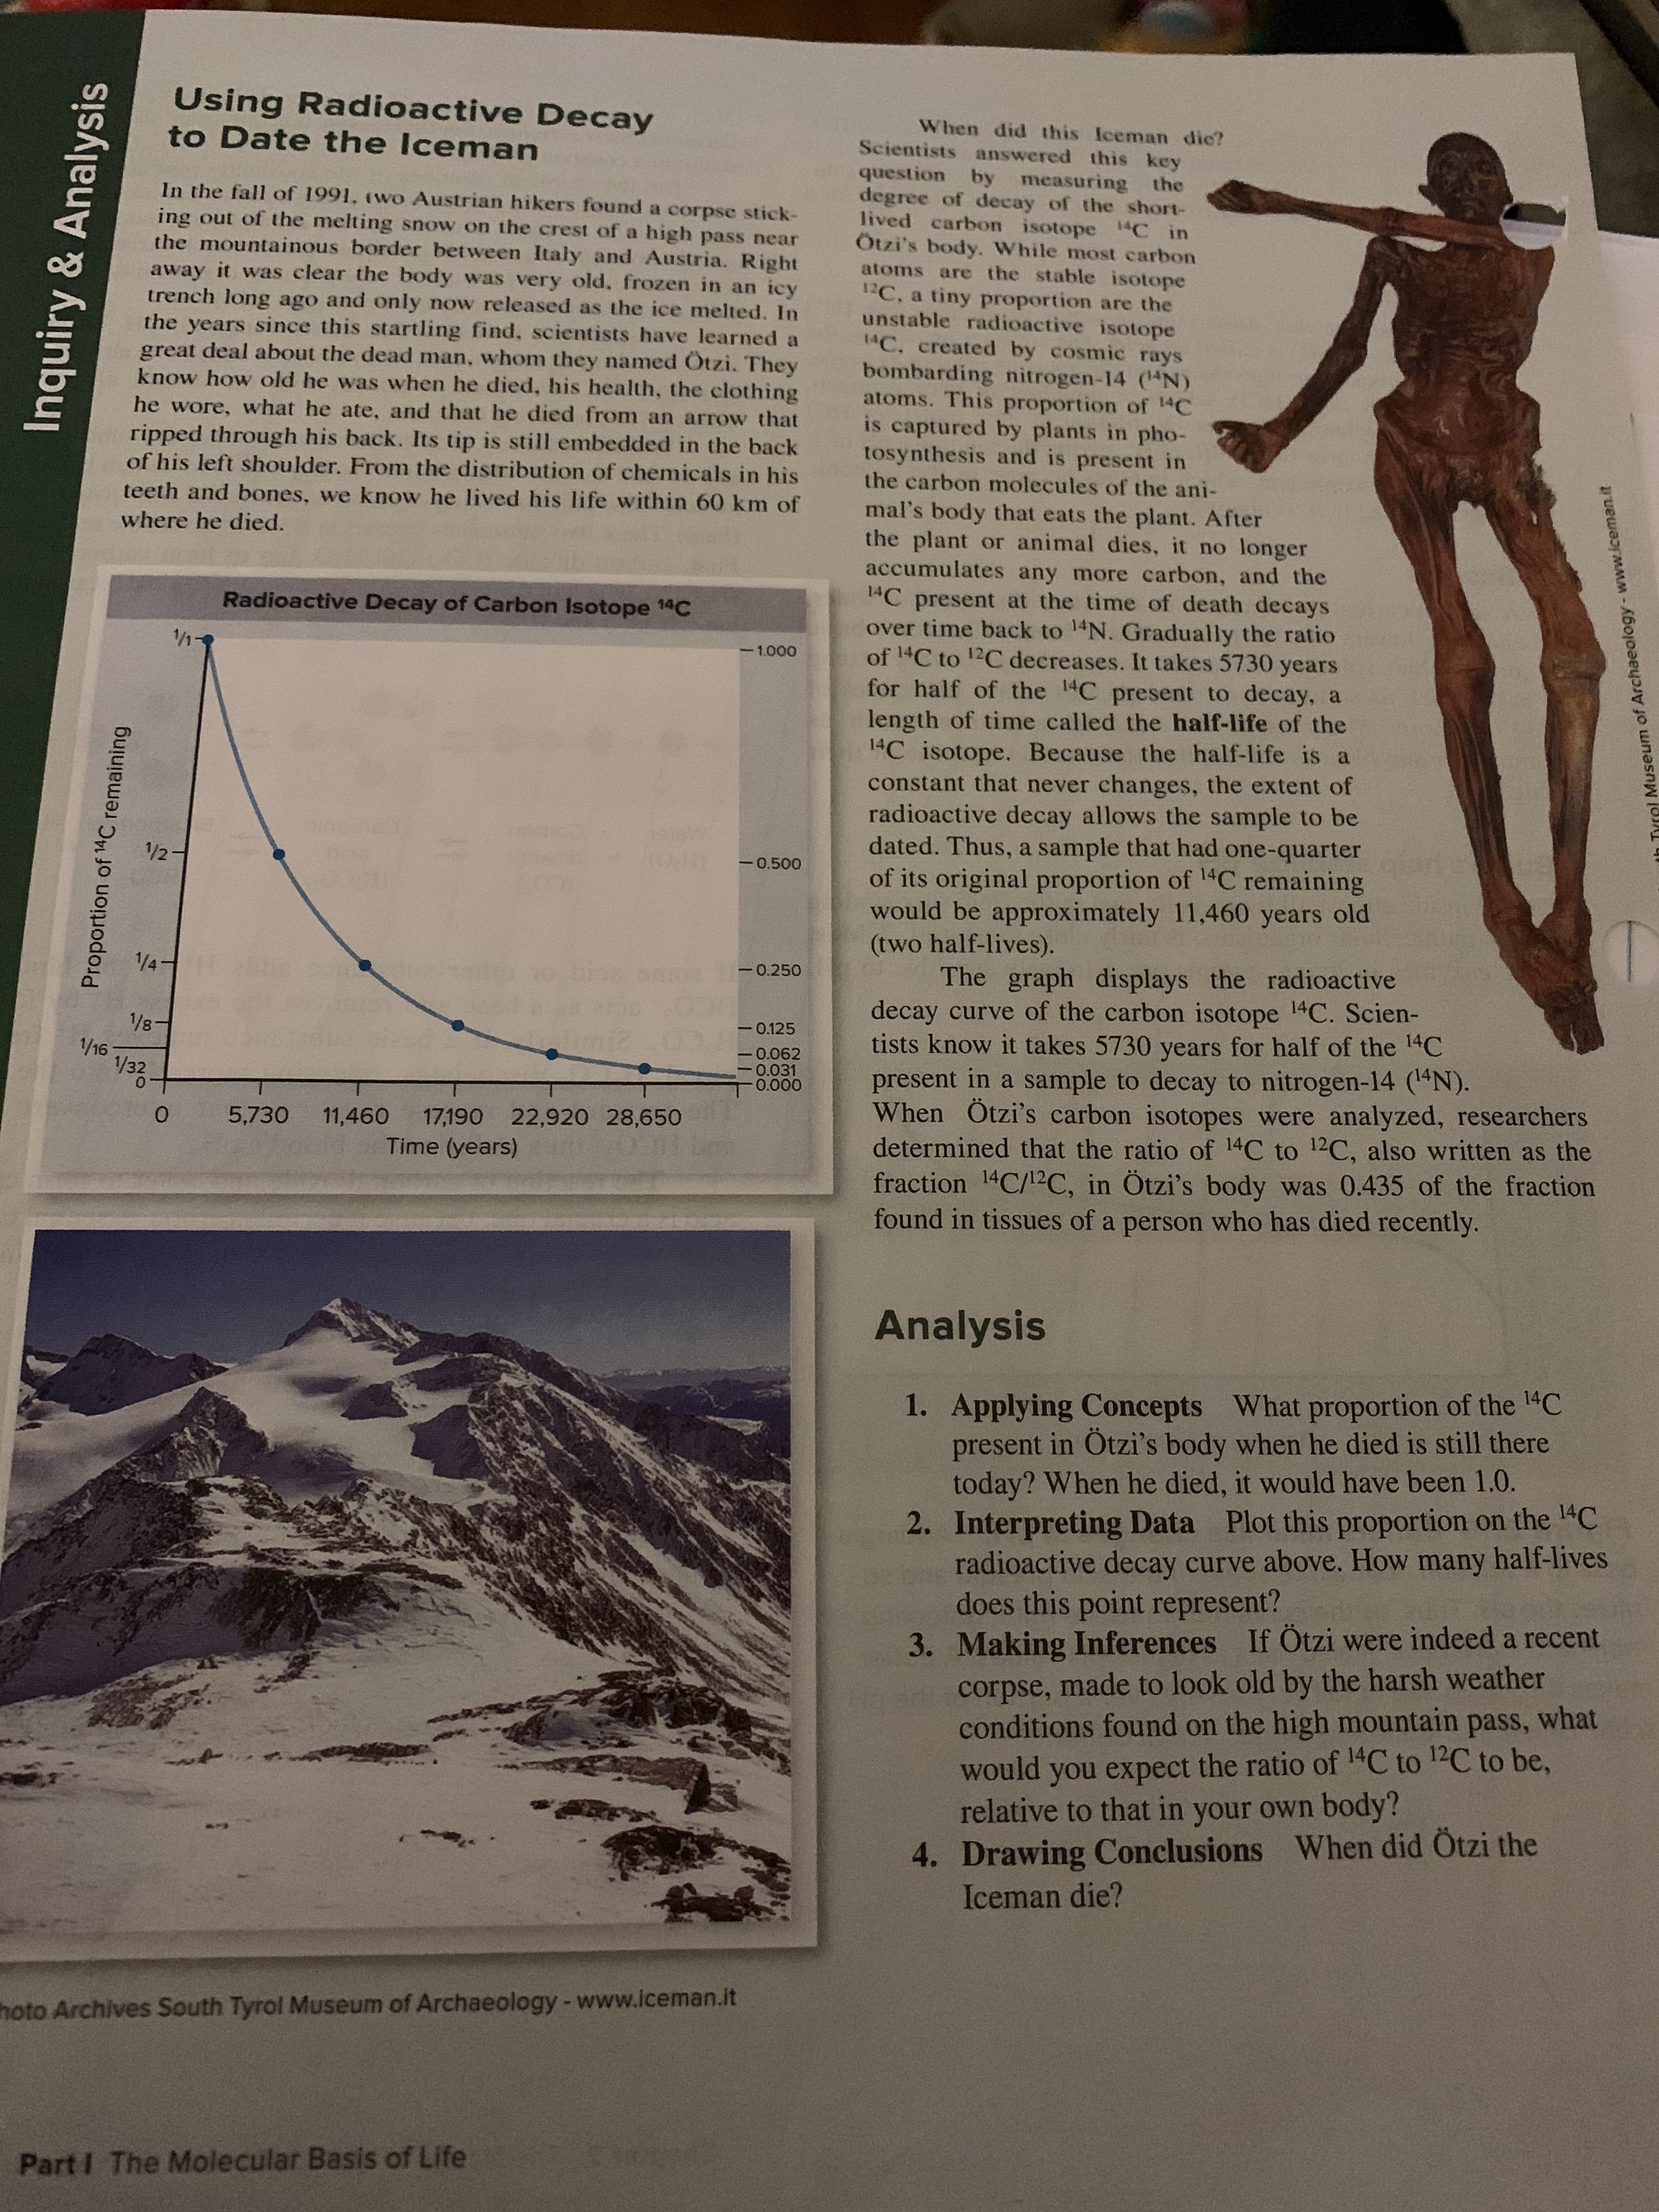 Using Radioactive Decay
to Date the Iceman
When did this Iceman dic?
Scientists answered this key
question by measuring the
degree of decay of the short-
lived carbon isotope 1C in
Ötzi's body. While most carbon
atoms are the stable isotope
12C.
unstable radioactive isotope
14C. created by cosmic rays
bombarding nitrogen-14 (4N)
atoms. This proportion of 14C
is captured by plants in pho-
tosynthesis and is present in
In the fall of 1991. (wo Austrian hikers found a corpse stick-
ing out of the melting snow on the crest of a
high pass near
the mountainous border between Italy and Austria. Right
away it was clear the body was very old, frozen in an
icy
now released as the ice melted. In
tiny proportion are the
a
trench long ago and only
the years since this startling find, scientists have learned a
great deal about the dead man, whom they named Ötzi. They
know how old he was when he died, his health, the clothing
he wore, what he ate, and that he died from an arrow that
ripped through his back. Its tip is still embedded in the back
of his left shoulder. From the distribution of chemicals in his
the carbon molecules of the ani-
teeth and bones, we know he lived his life within 60 km of
mal's body that eats the plant. After
the plant or animal dies, it no longer
accumulates any more carbon, and the
1C present at the time of death decays
over time back to 14N. Gradually the ratio
of 14C to 12C decreases. It takes 5730 years
for half of the 14C present to decay, a
length of time called the half-life of the
1C isotope. Because the half-life is a
constant that never changes, the extent of
radioactive decay allows the sample to be
dated. Thus, a sample that had one-quarter
of its original proportion of 14C remaining
would be approximately 11,460 years old
(two half-lives).
The graph displays the radioactive
decay curve of the carbon isotope 14C. Scien-
tists know it takes 5730 years for half of the 14C
present in a sample to decay to nitrogen-14 (14N)
When Ötzi's carbon isotopes were analyzed, researchers
determined that the ratio of 14C to 12C, also written as the
fraction 14C/12C, in Ötzi's body was 0.435 of the fraction
found in tissues of a person who has died recently.
where he died.
Radioactive Decay of Carbon Isotope 14C
1-
-1.000
1/21
-0.500
1/4
10
OruC 0.250
0.125
1/8-1
1/16
1/32
0.062
0.031
0.000
17,190 22,920 28,650
11,460
5,730
Time (years)
Analysis
of the 14C
Applying Concepts What proportion
present in Otzi's body when he died is still there
today? When he died, it would have been 1.0.
2. Interpreting Data Plot this proportion on the 4C
radioactive decay curve above. How many half-lives
does this point represent?
3. Making Inferences If Otzi were indeed a recent
corpse, made to look old by the harsh weather
conditions found on the high mountain pass, what
would you expect the ratio of 1C to 12C to be,
relative to that in your own
1.
body?
4. Drawing Conclusions When did Ötzi the
Iceman die?
hoto Archives South Tyrol Museum of Archaeology -www.iceman.it
Part I The Molecular Basis of Life
Inquiry & Analysis
Proportion of 14C remaining
th Tyrel Museum of Archaeology-www.iceman.it
